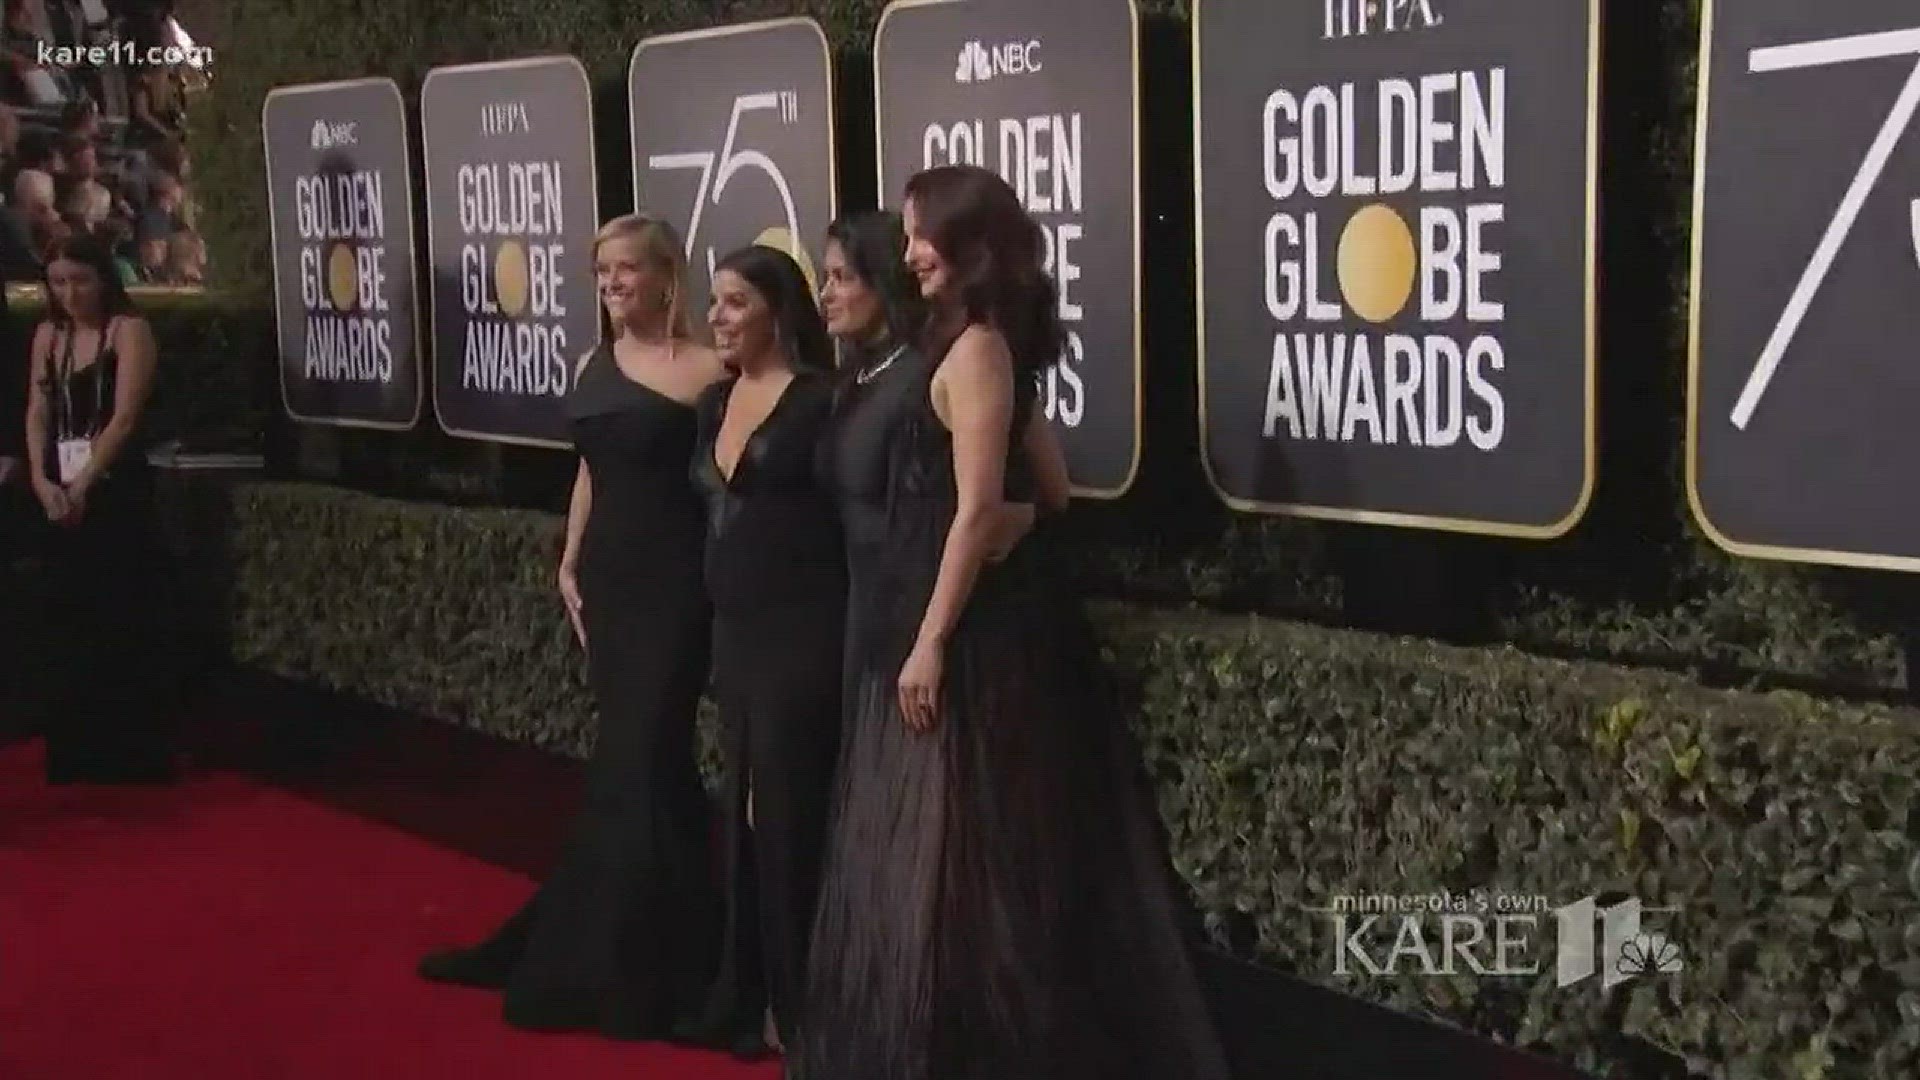 A unified message rolled out on the Golden Globes red carpet: Time's Up. An initiative created by women in Hollywood in the wake of recent sexual assault and harassment allegations. http://kare11.tv/2EjlOiK